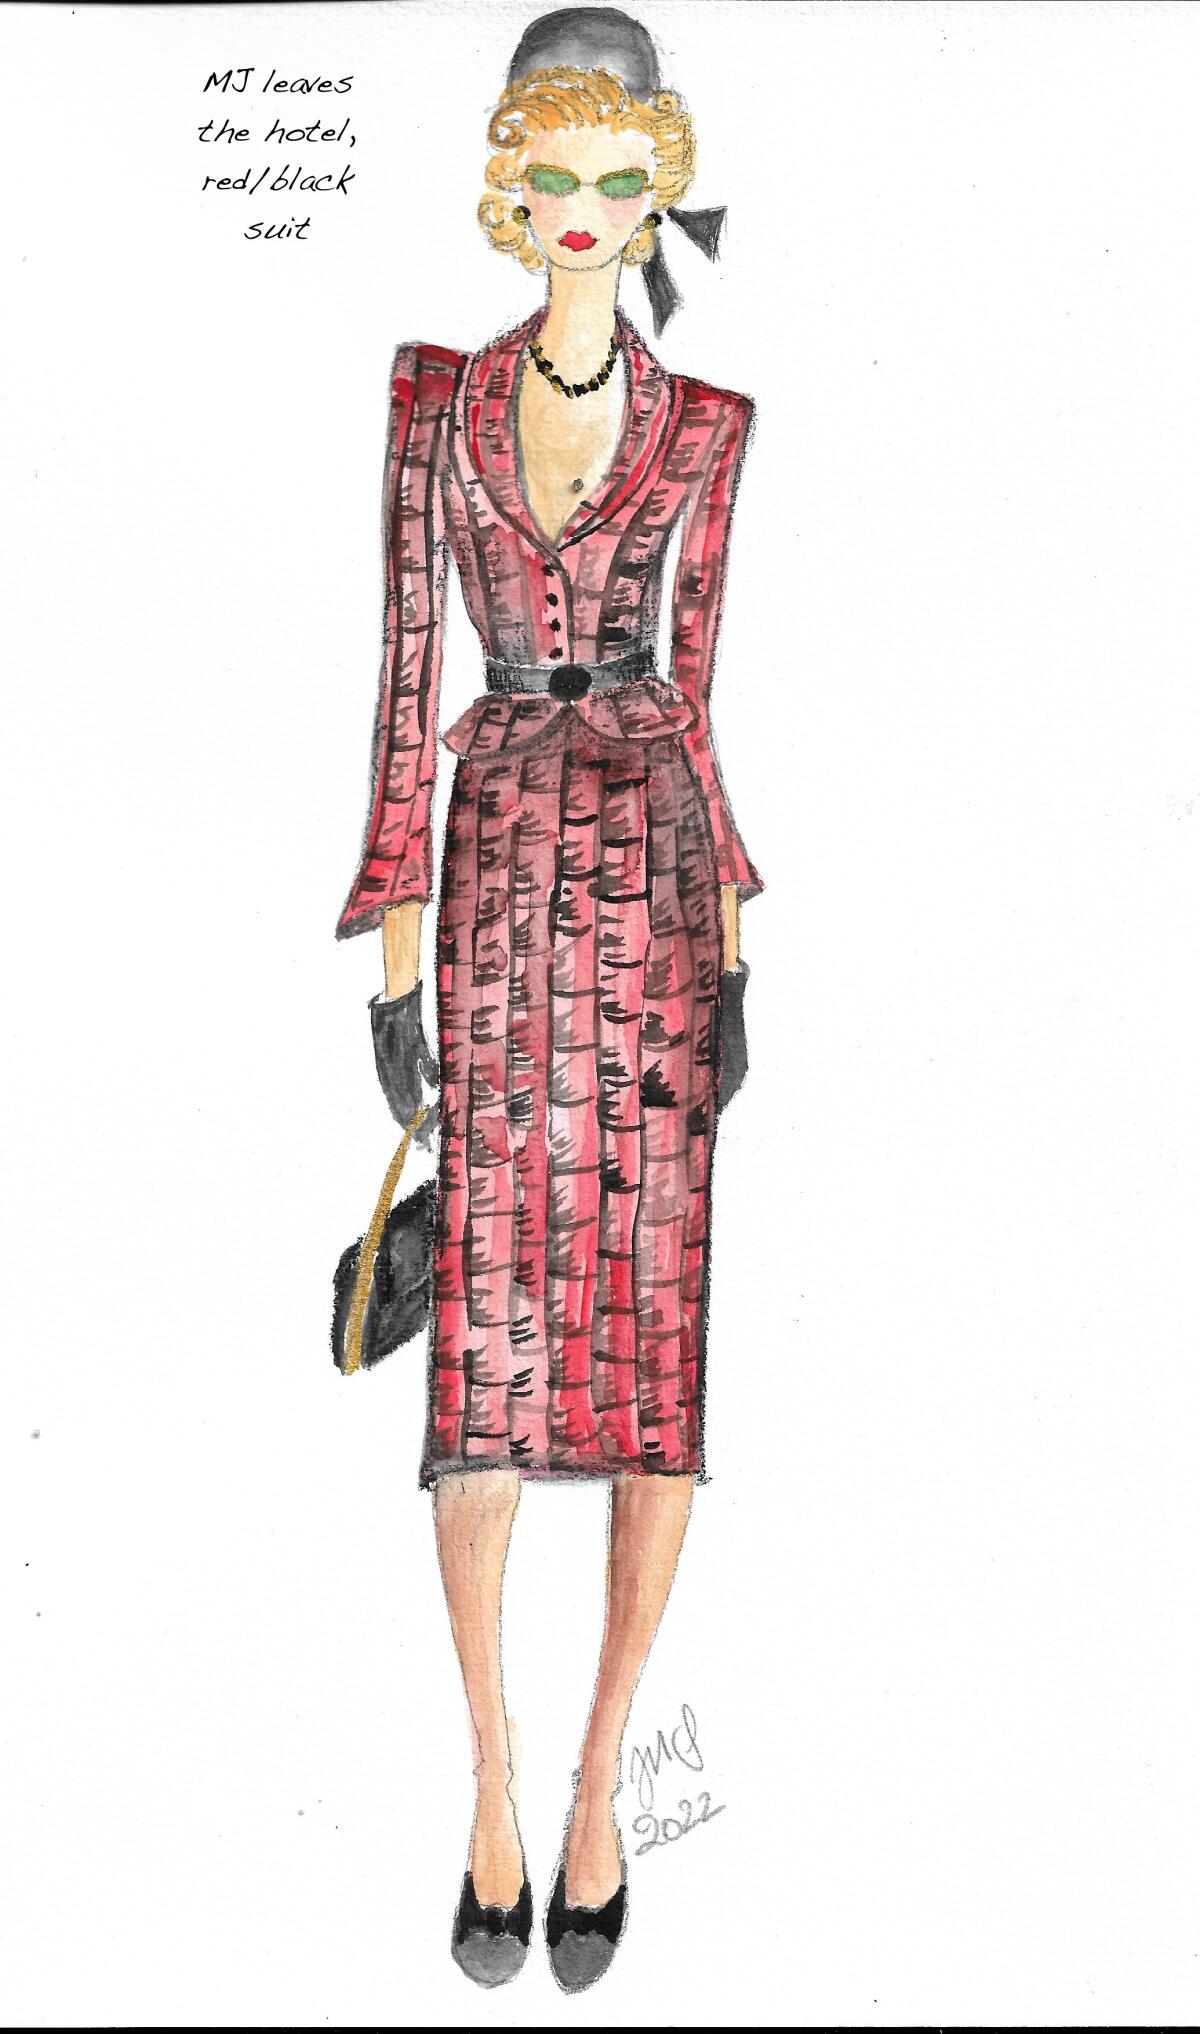 A sketch of the Mary Jayne Gold character, often dressed in vivid prints.